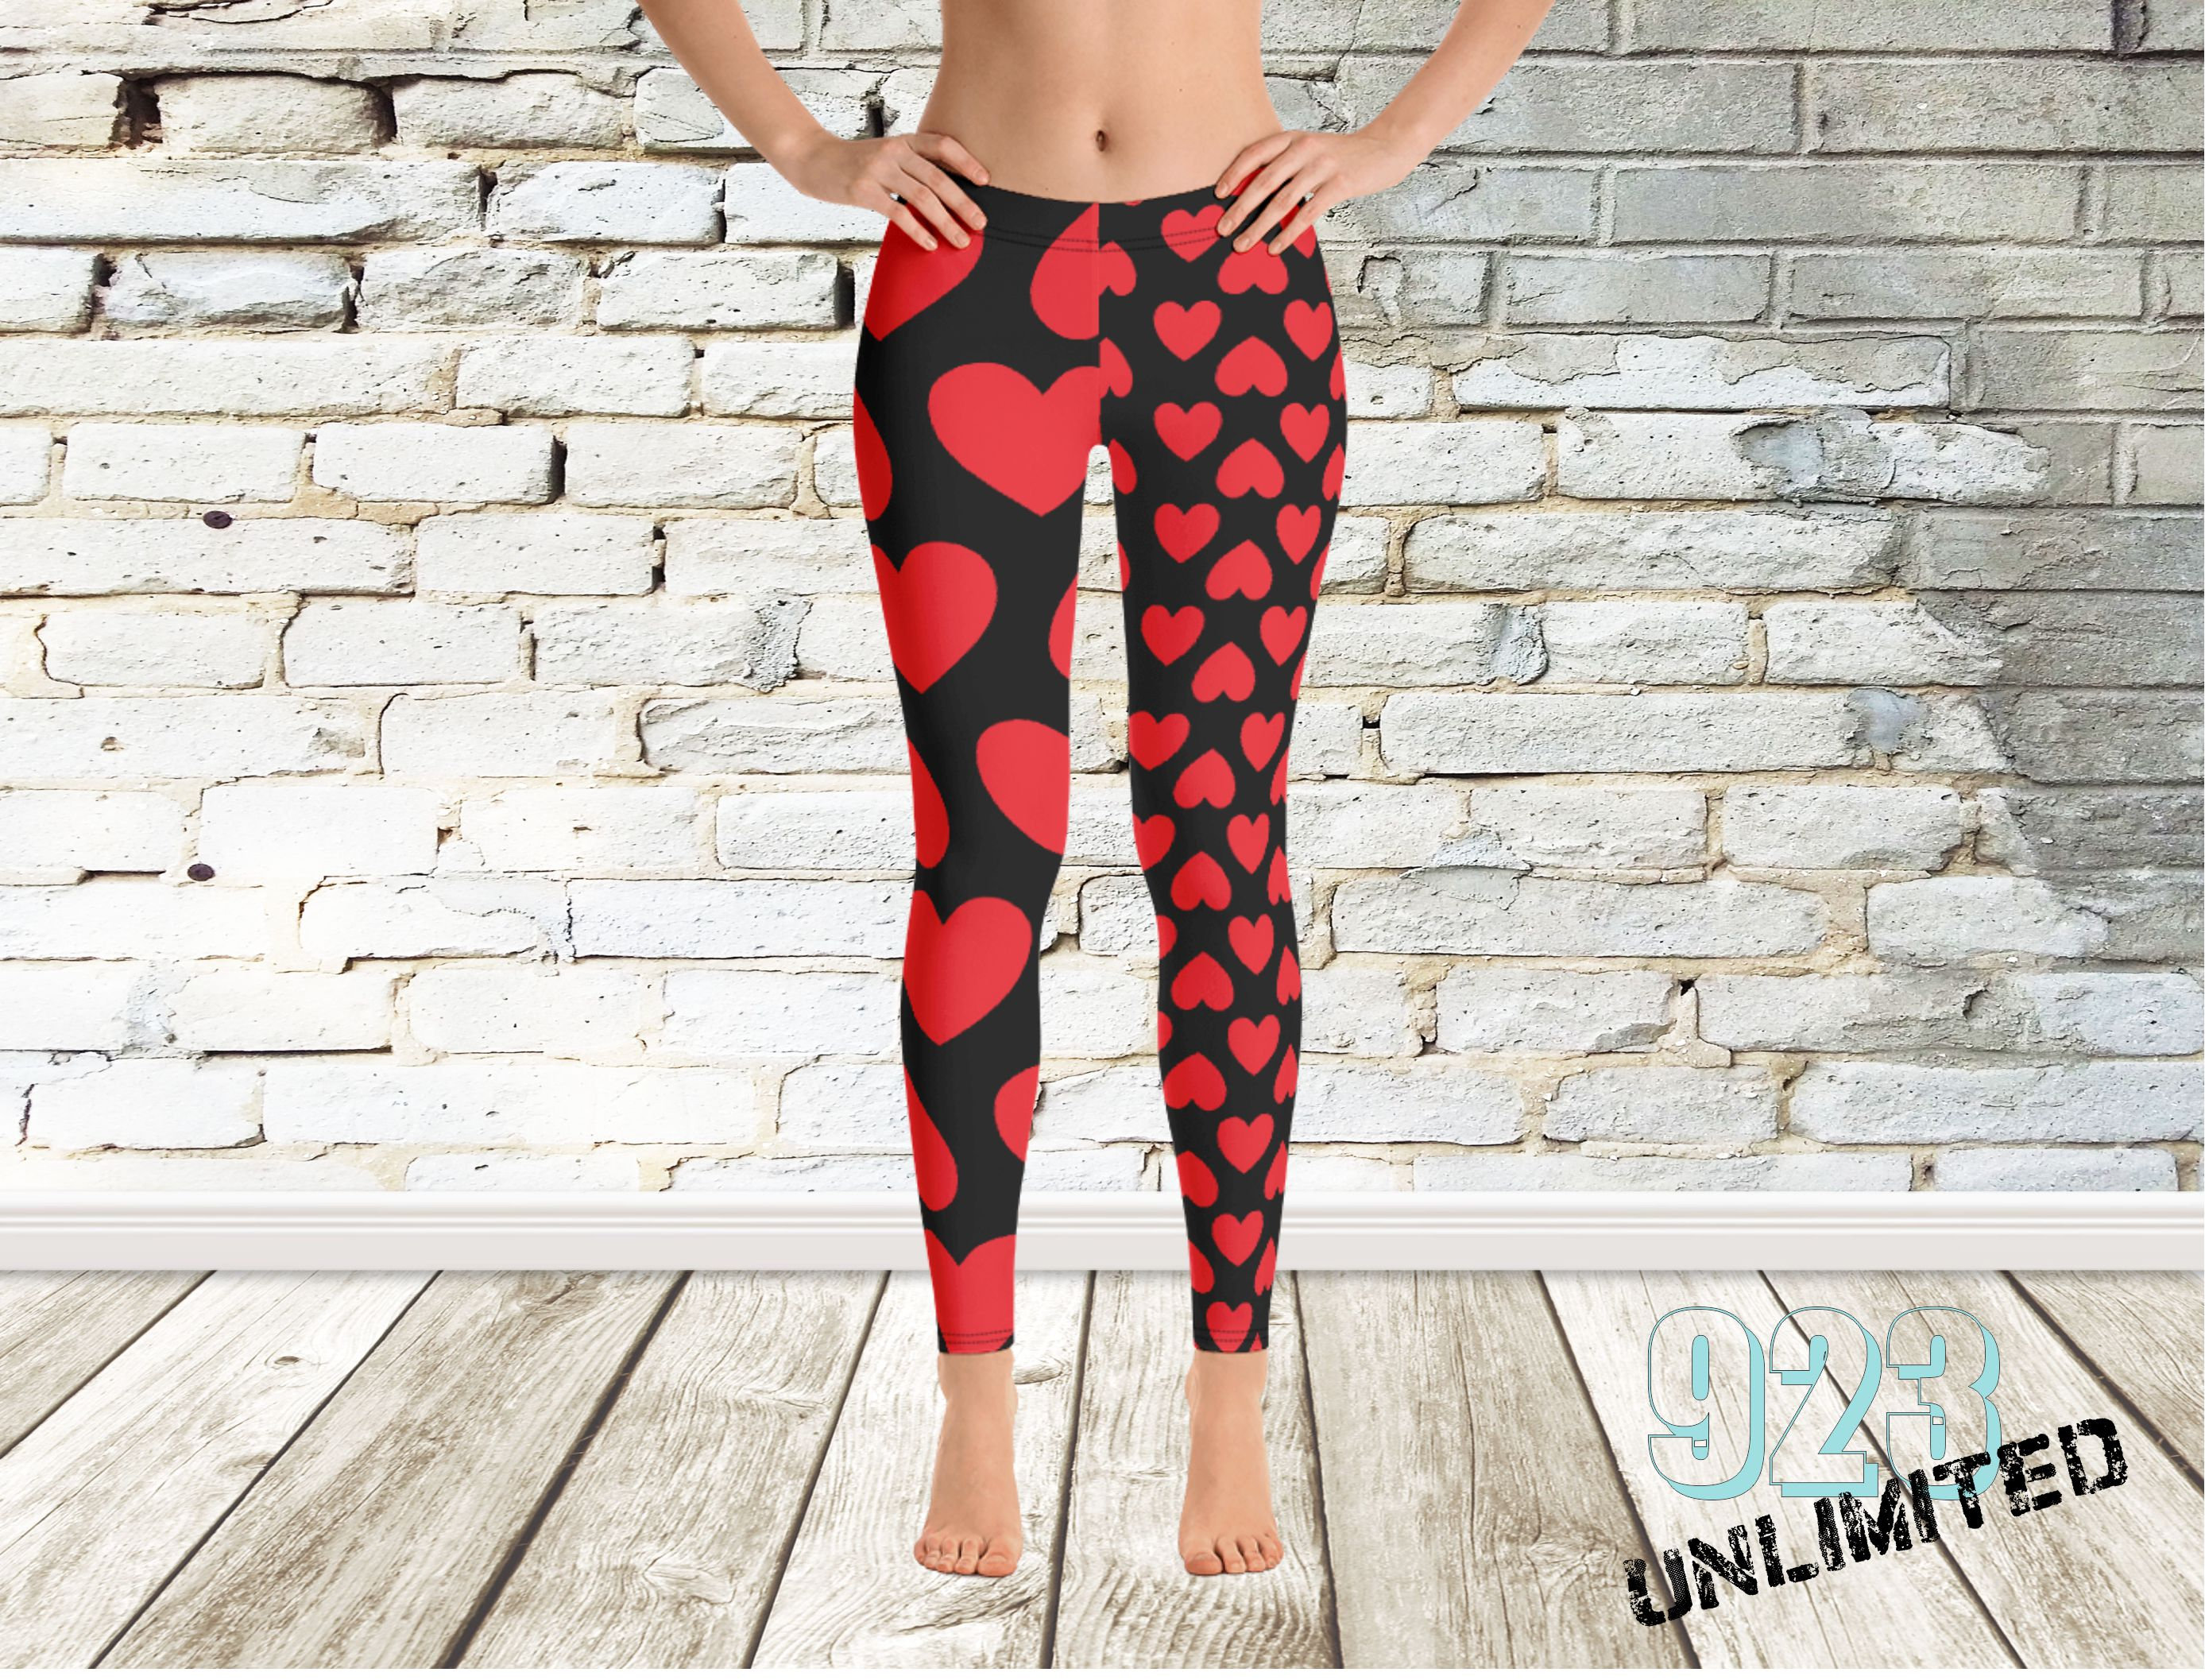 Queen of Hearts Tights 